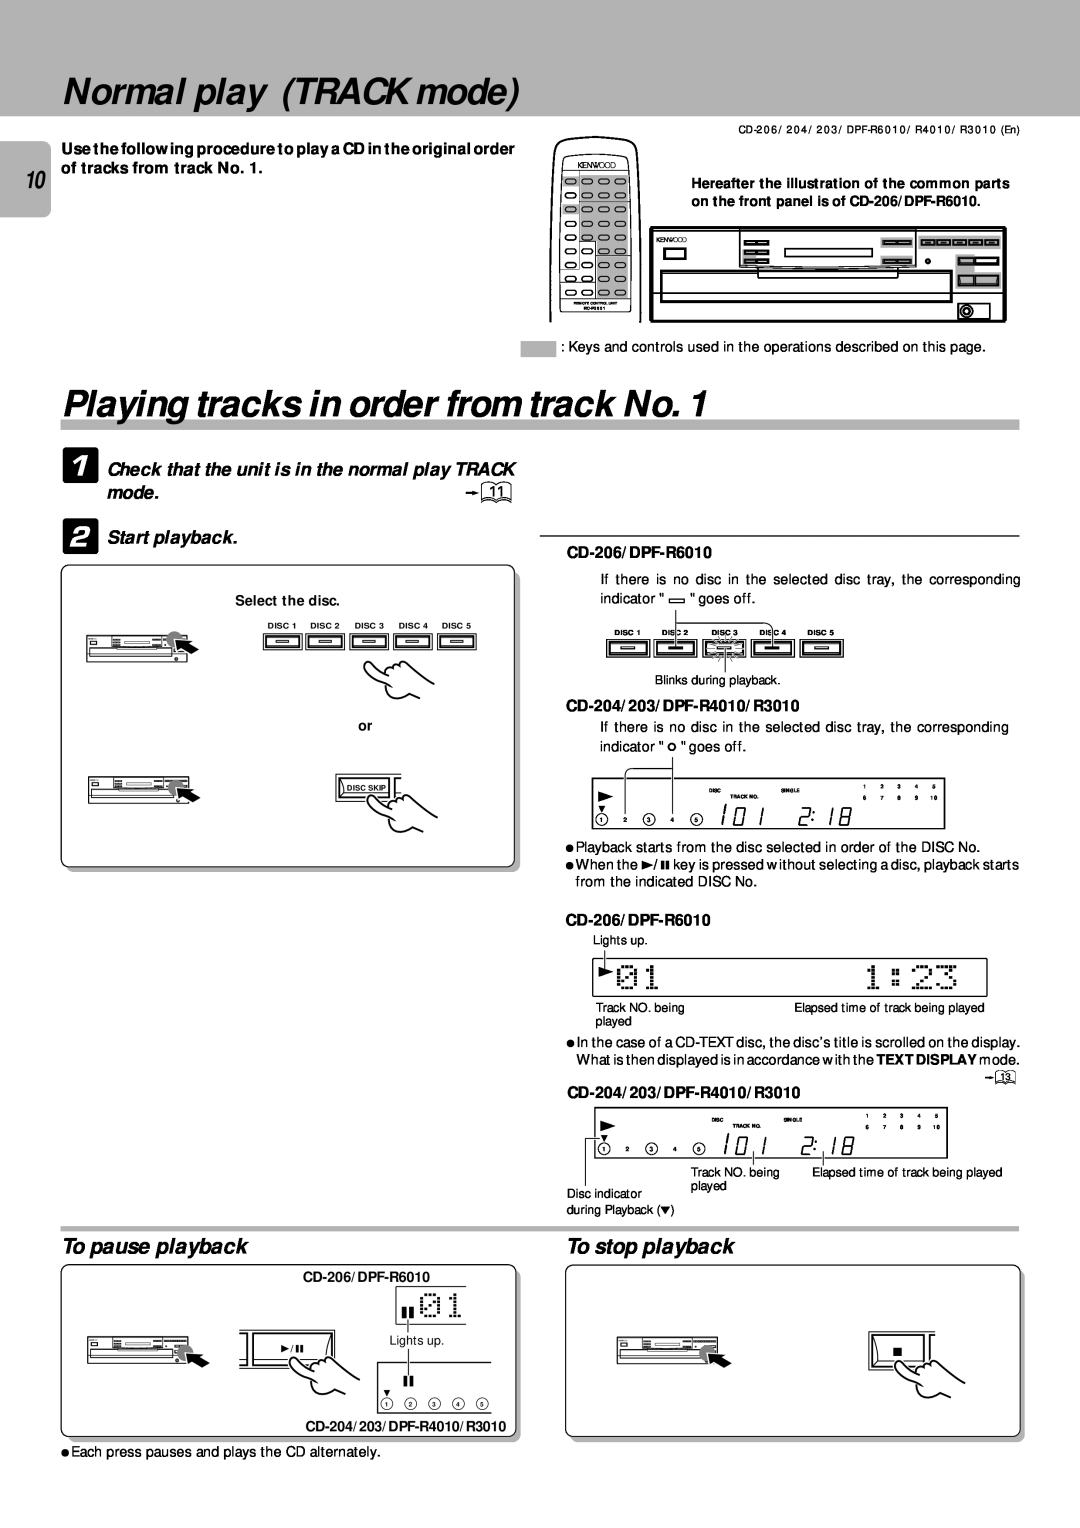 Kenwood DPF-R6010 Normal play TRACK mode, Playing tracks in order from track No, To pause playback, mode 2Start playback 